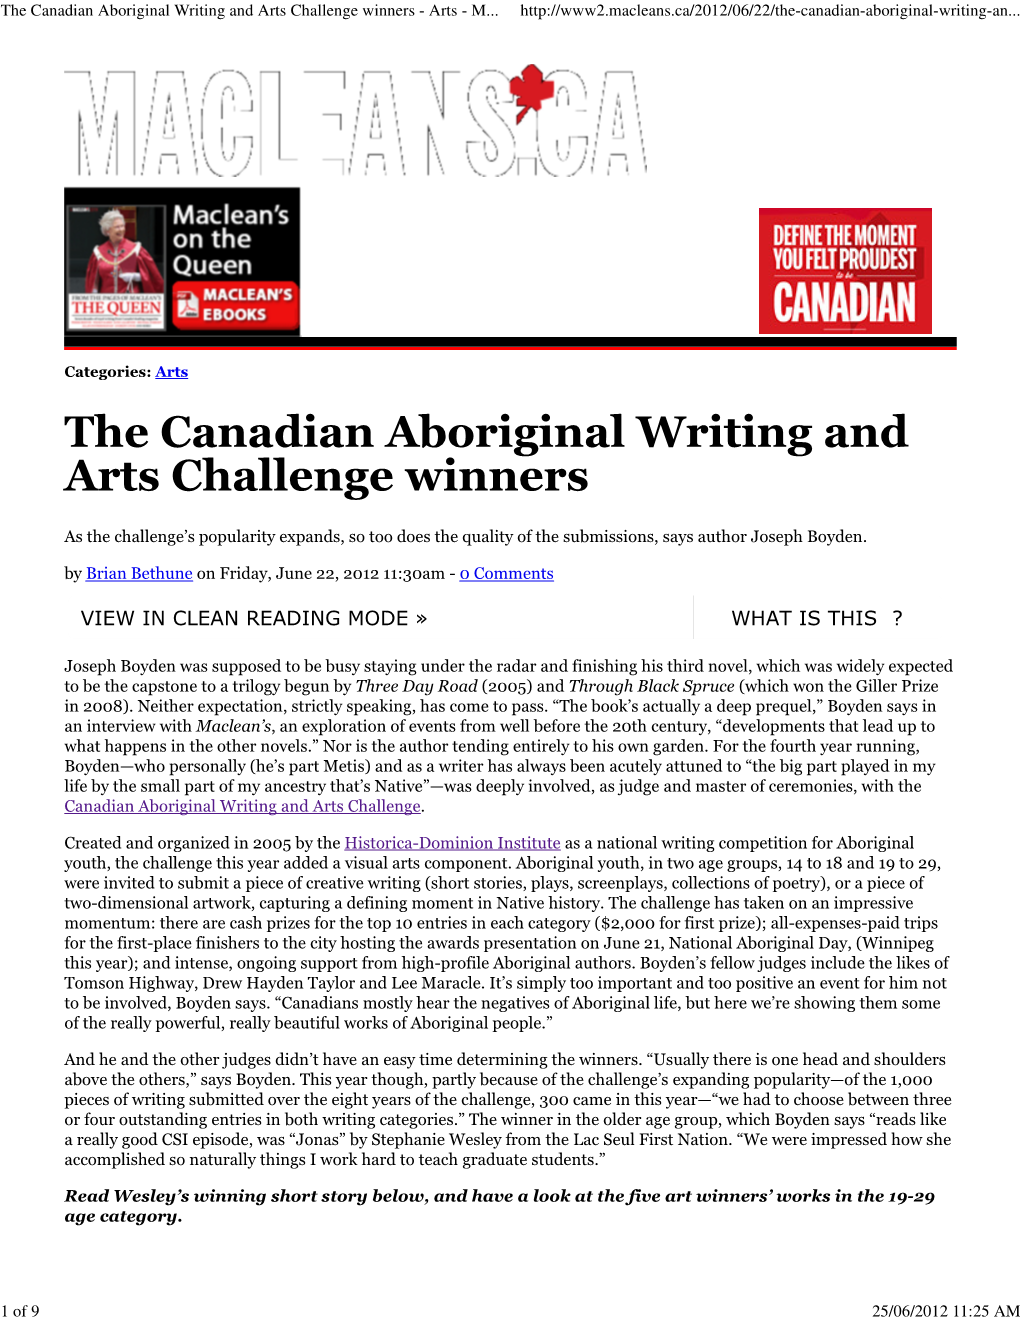 The Canadian Aboriginal Writing and Arts Challenge Winners - Arts - M